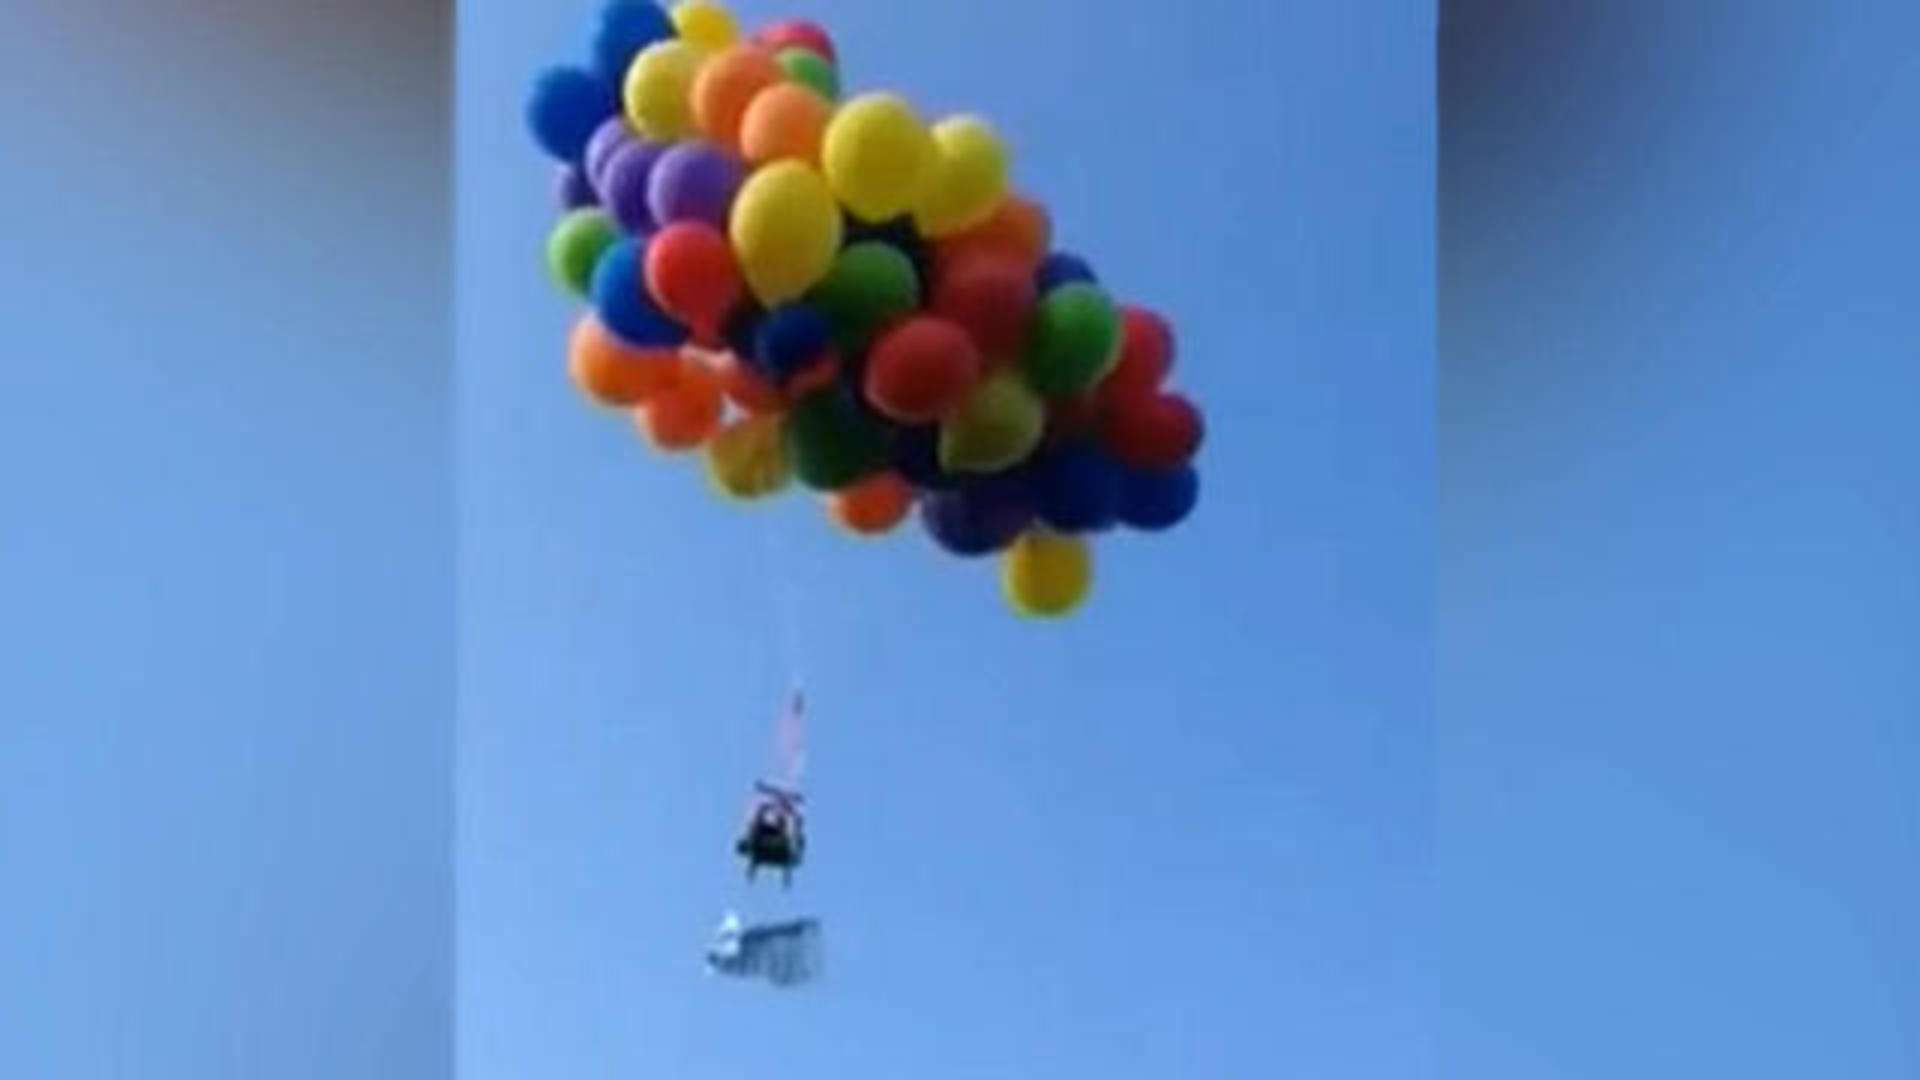 Canadian Man Arrested For Floating Lawn Chair By Balloon Cbs News